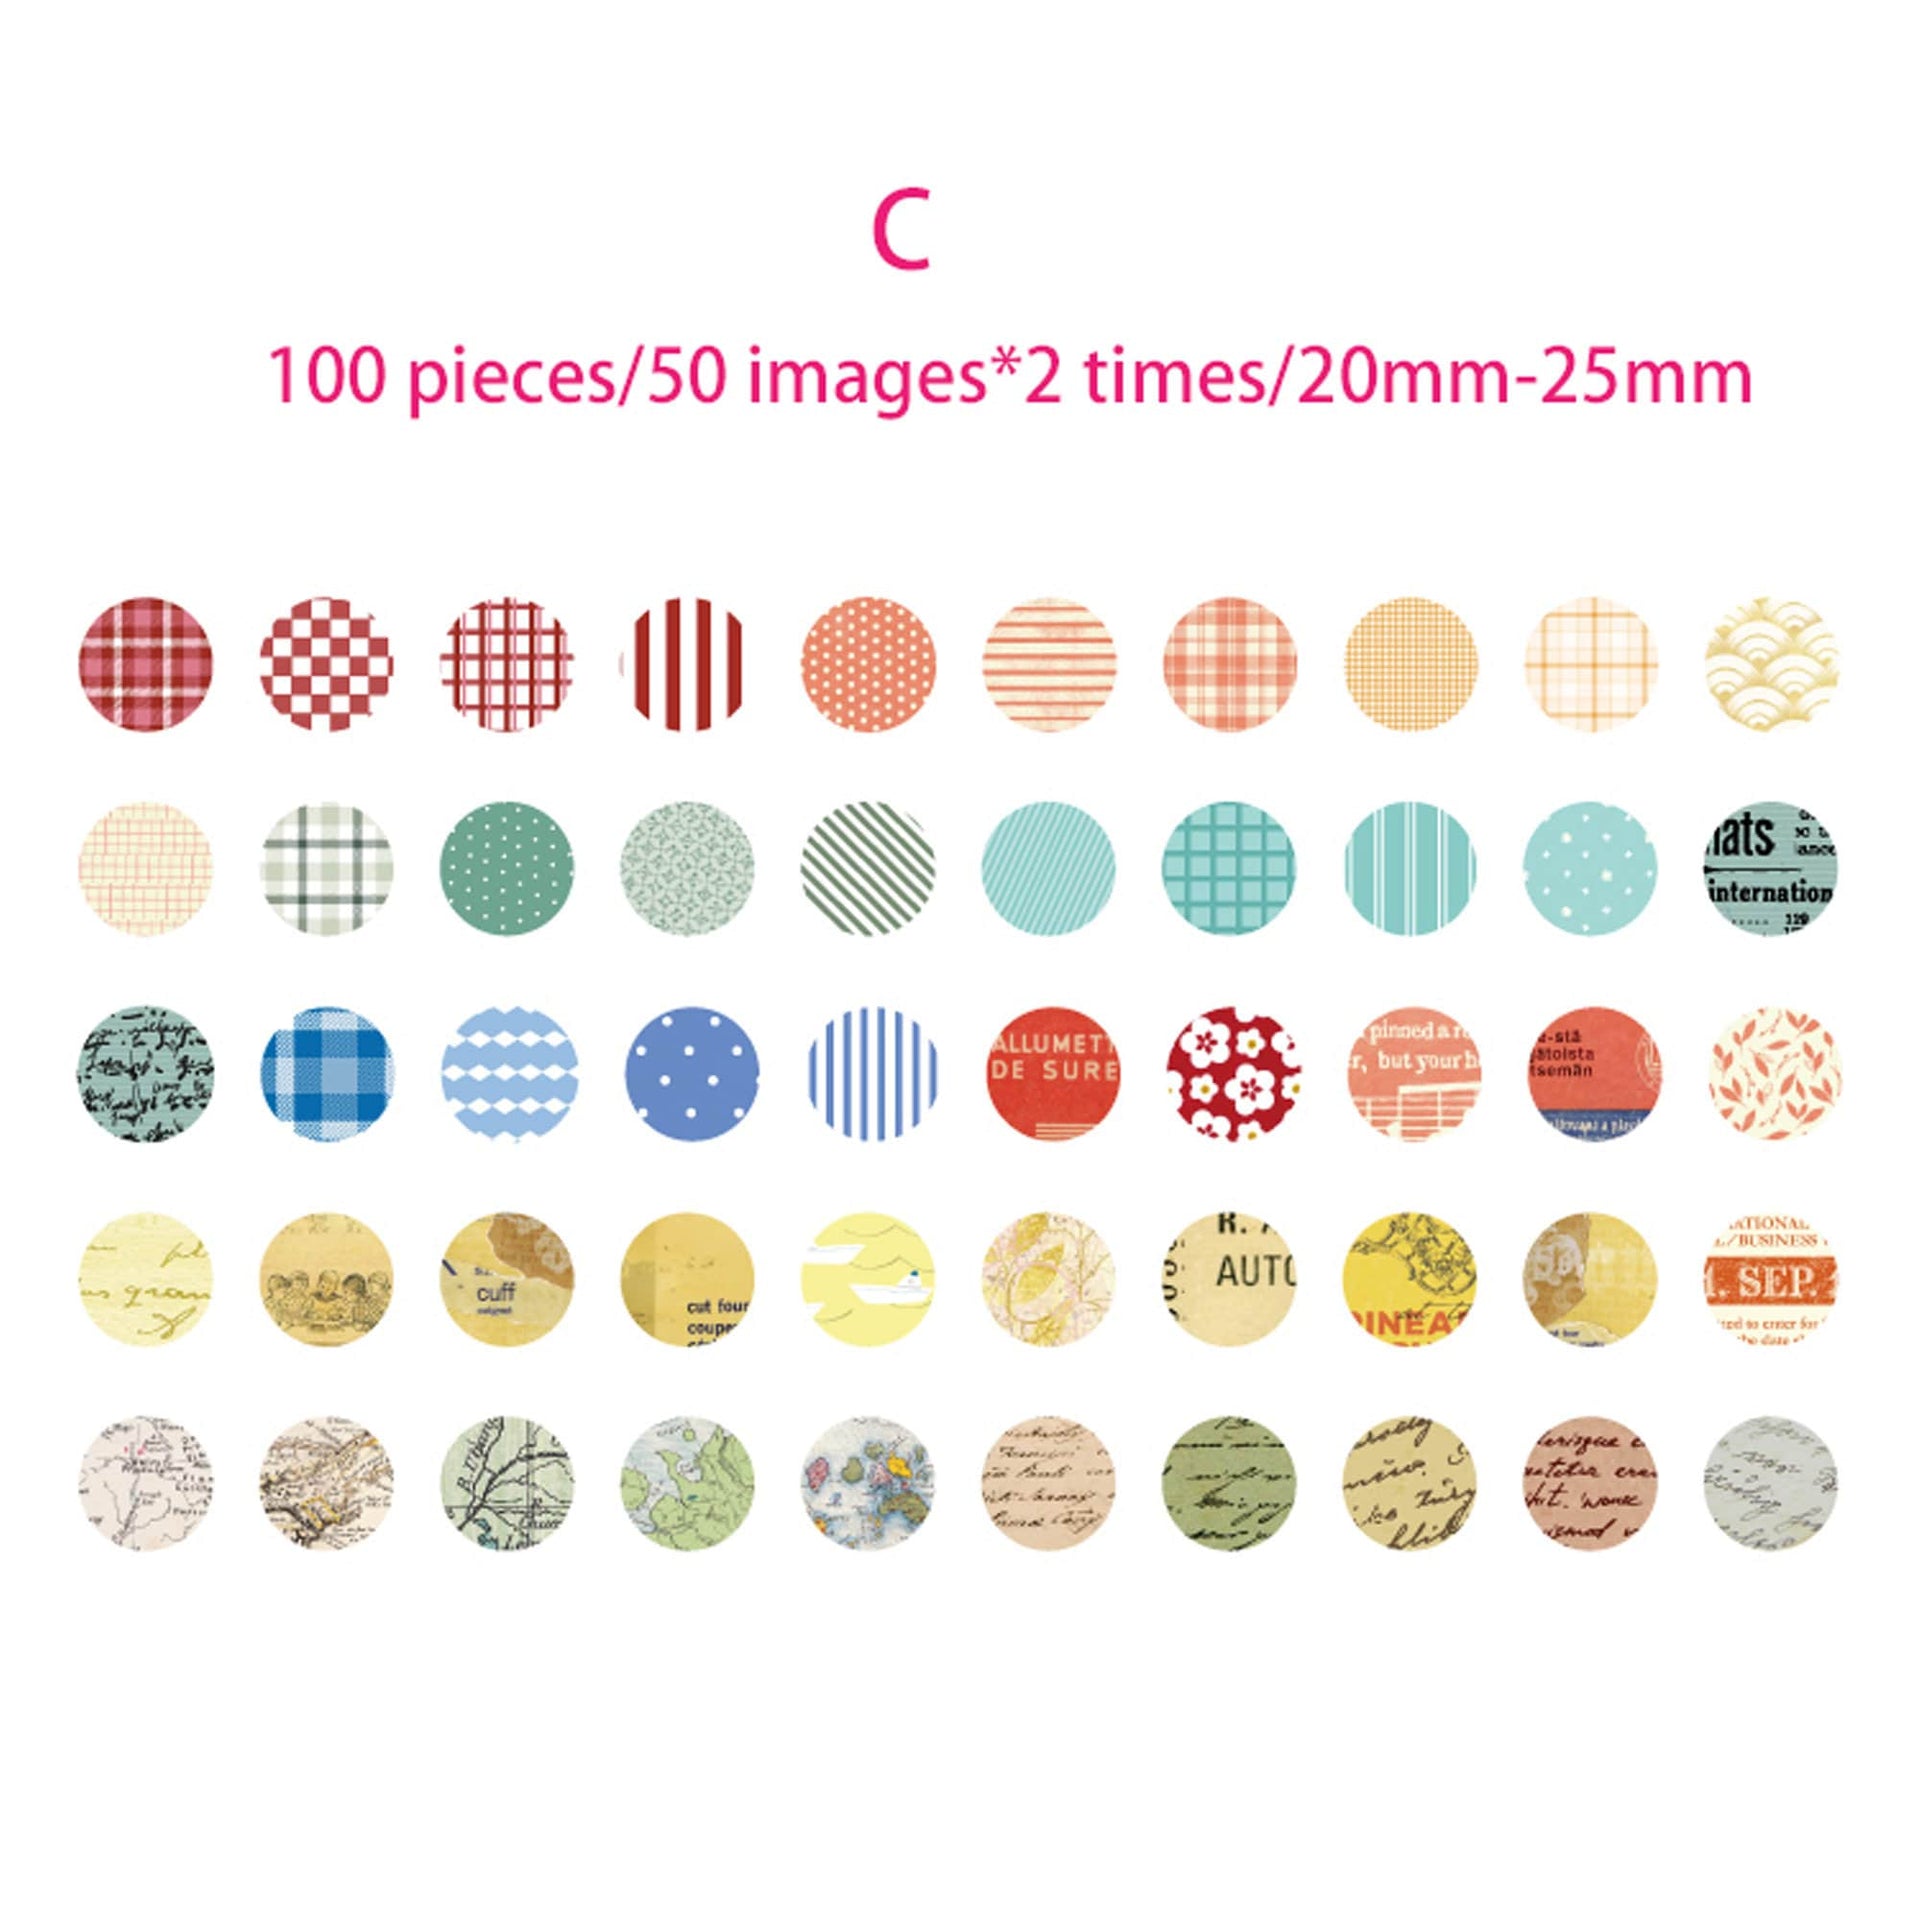 Cute Deco Sticker Sheets, Cute Stickers, 2 Sheets of Stickers